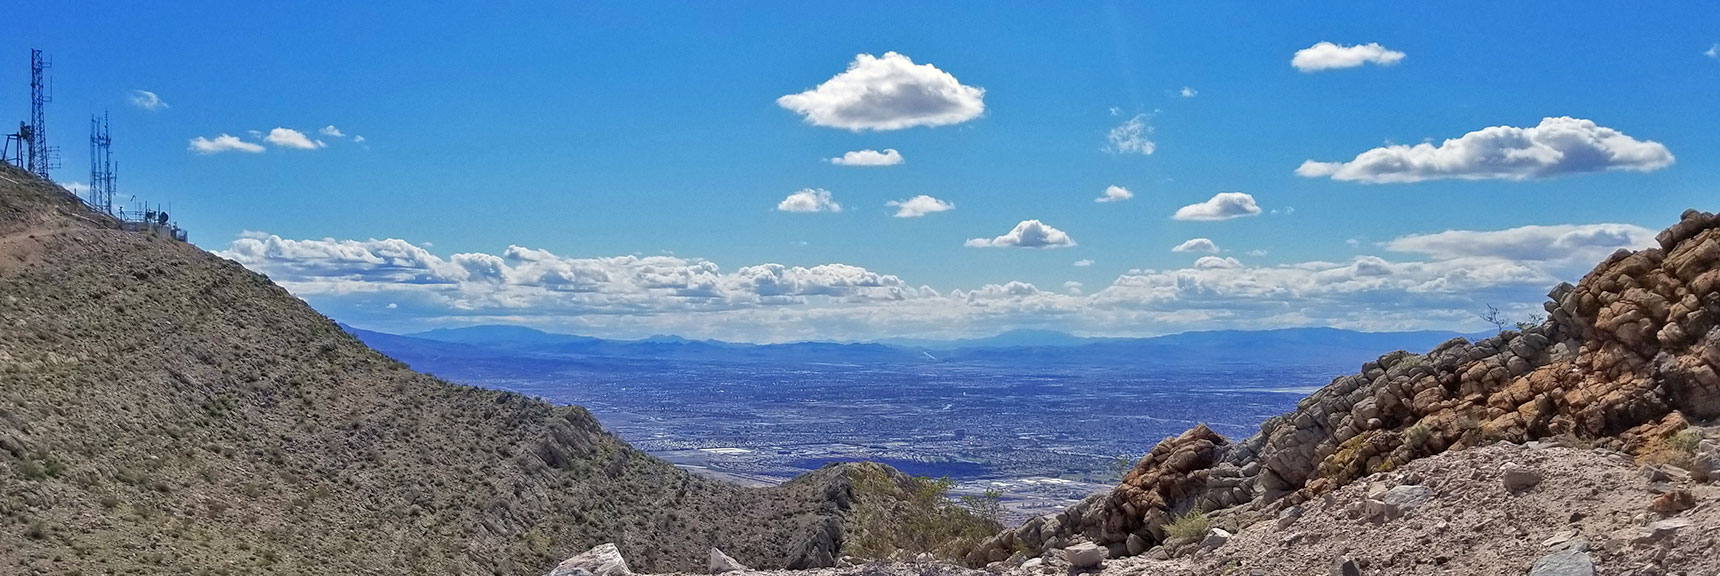 View of Las Vegas Valley from Near Second Summit of Frenchman Mountain, Nevada